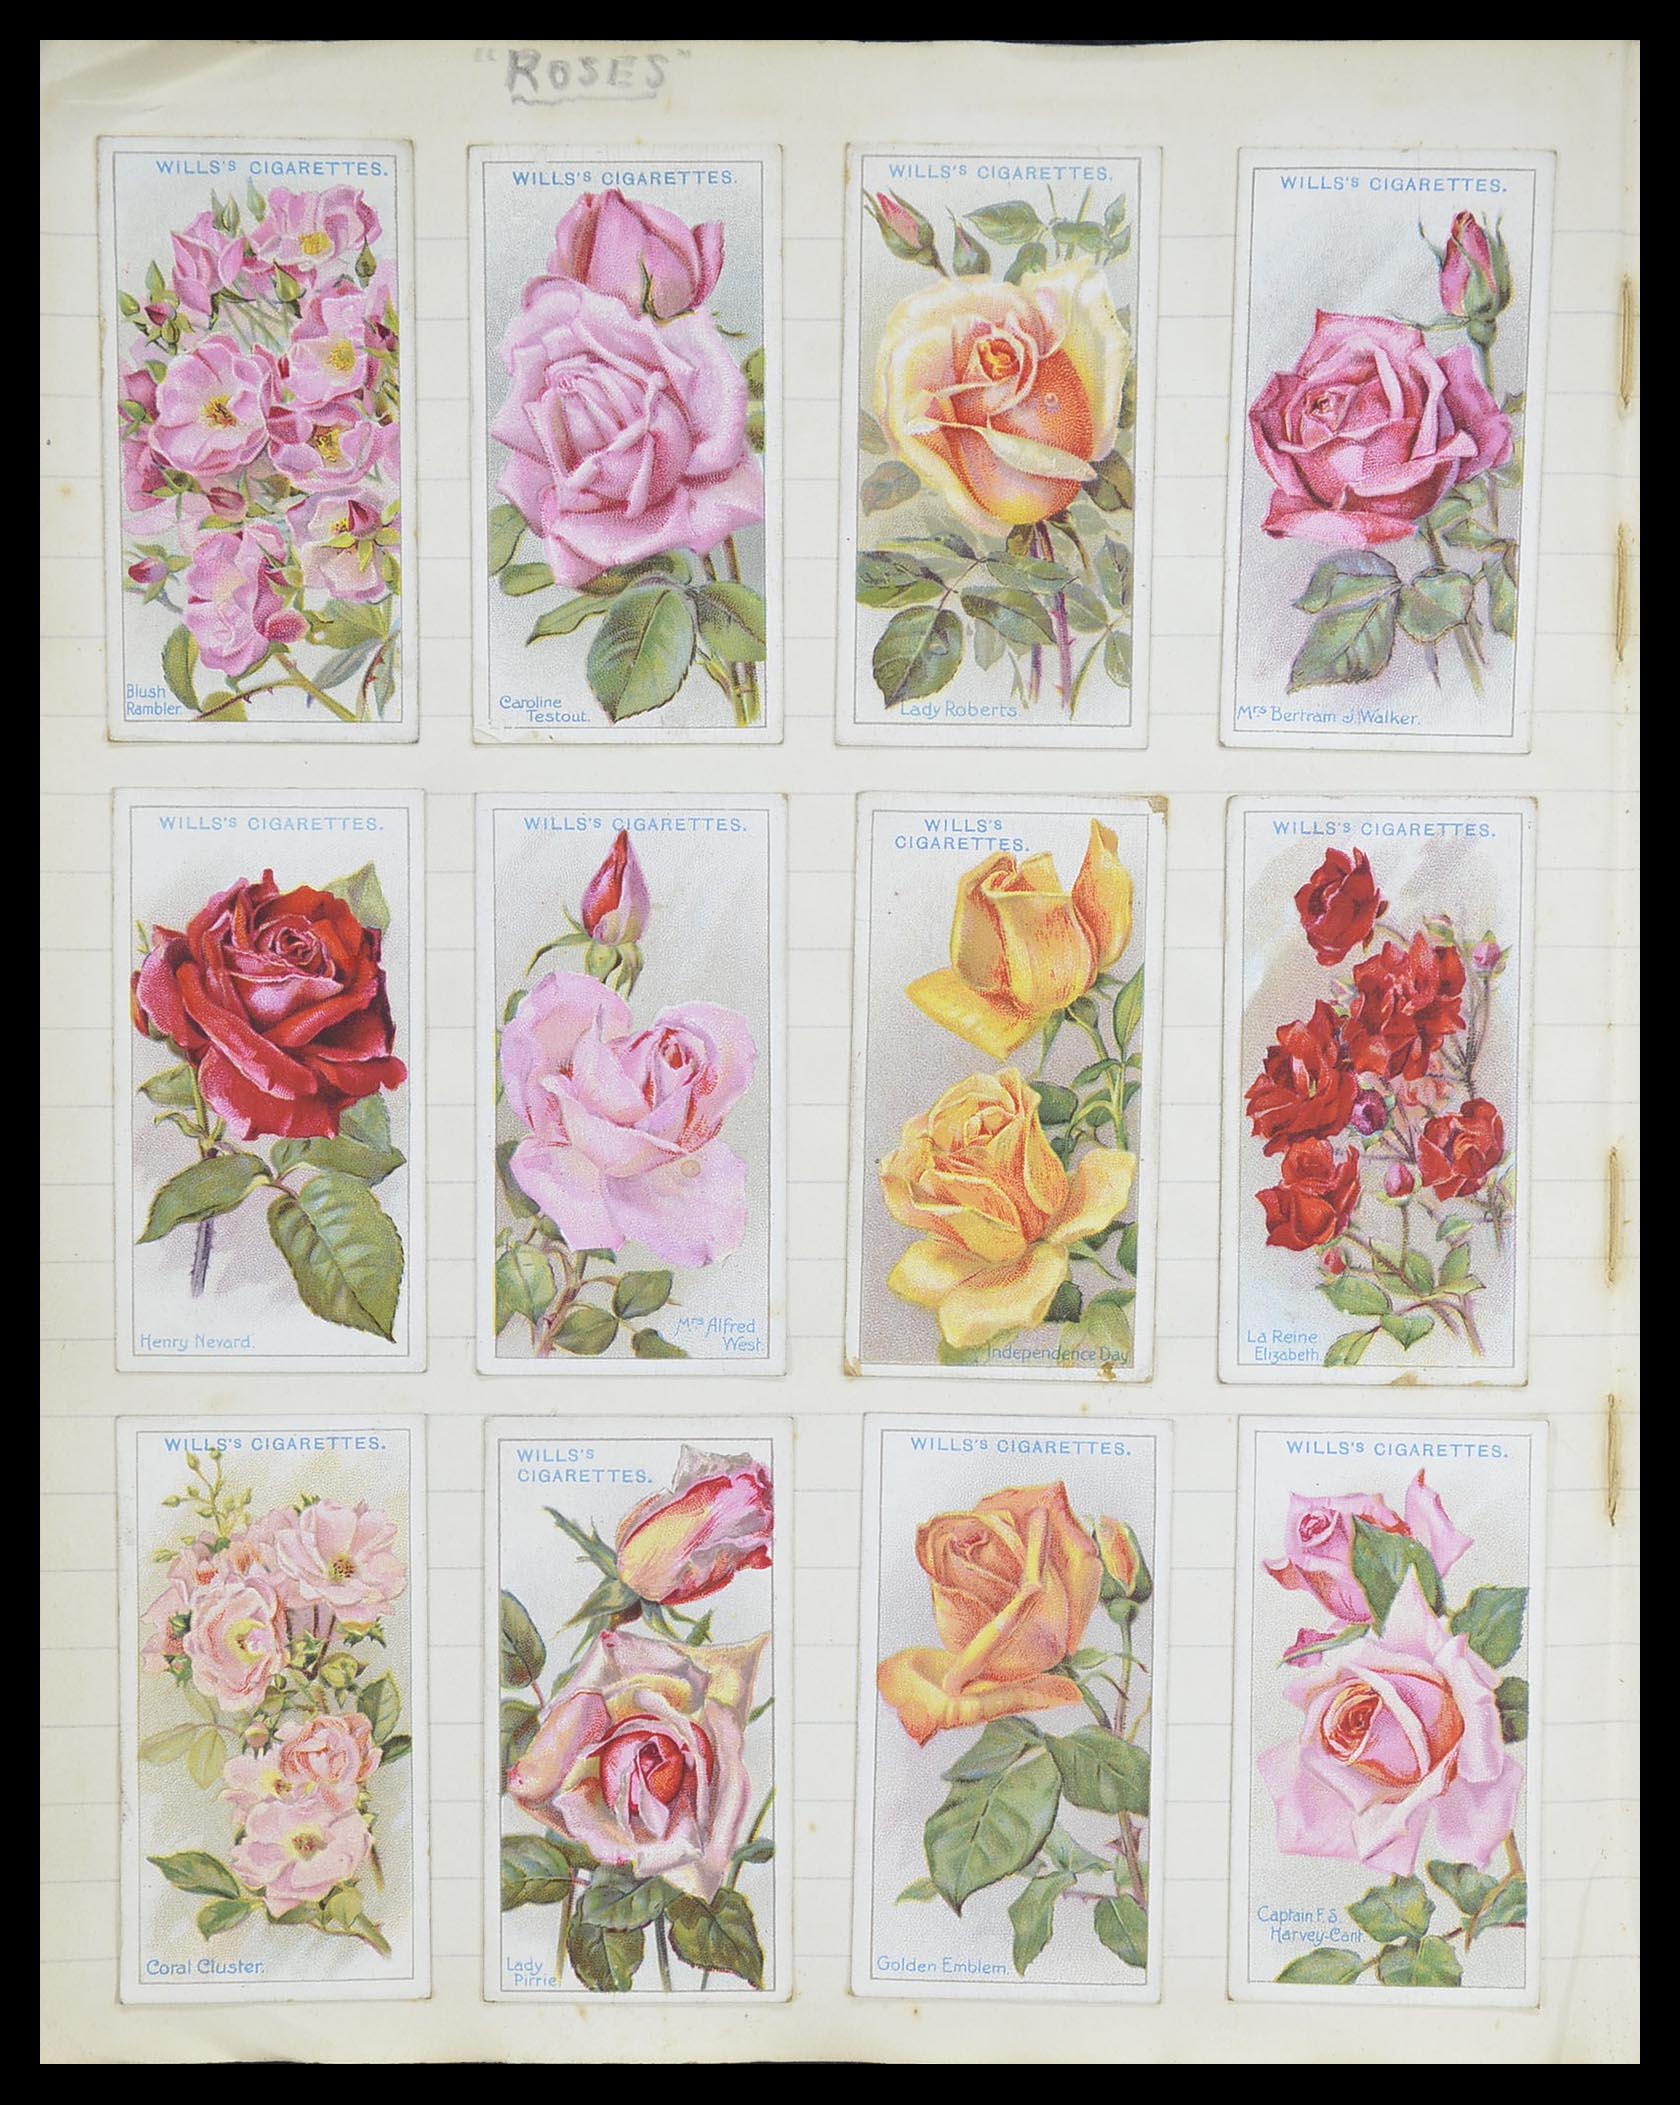 33444 070 - Stamp collection 33444 Great Britain cigarette cards.